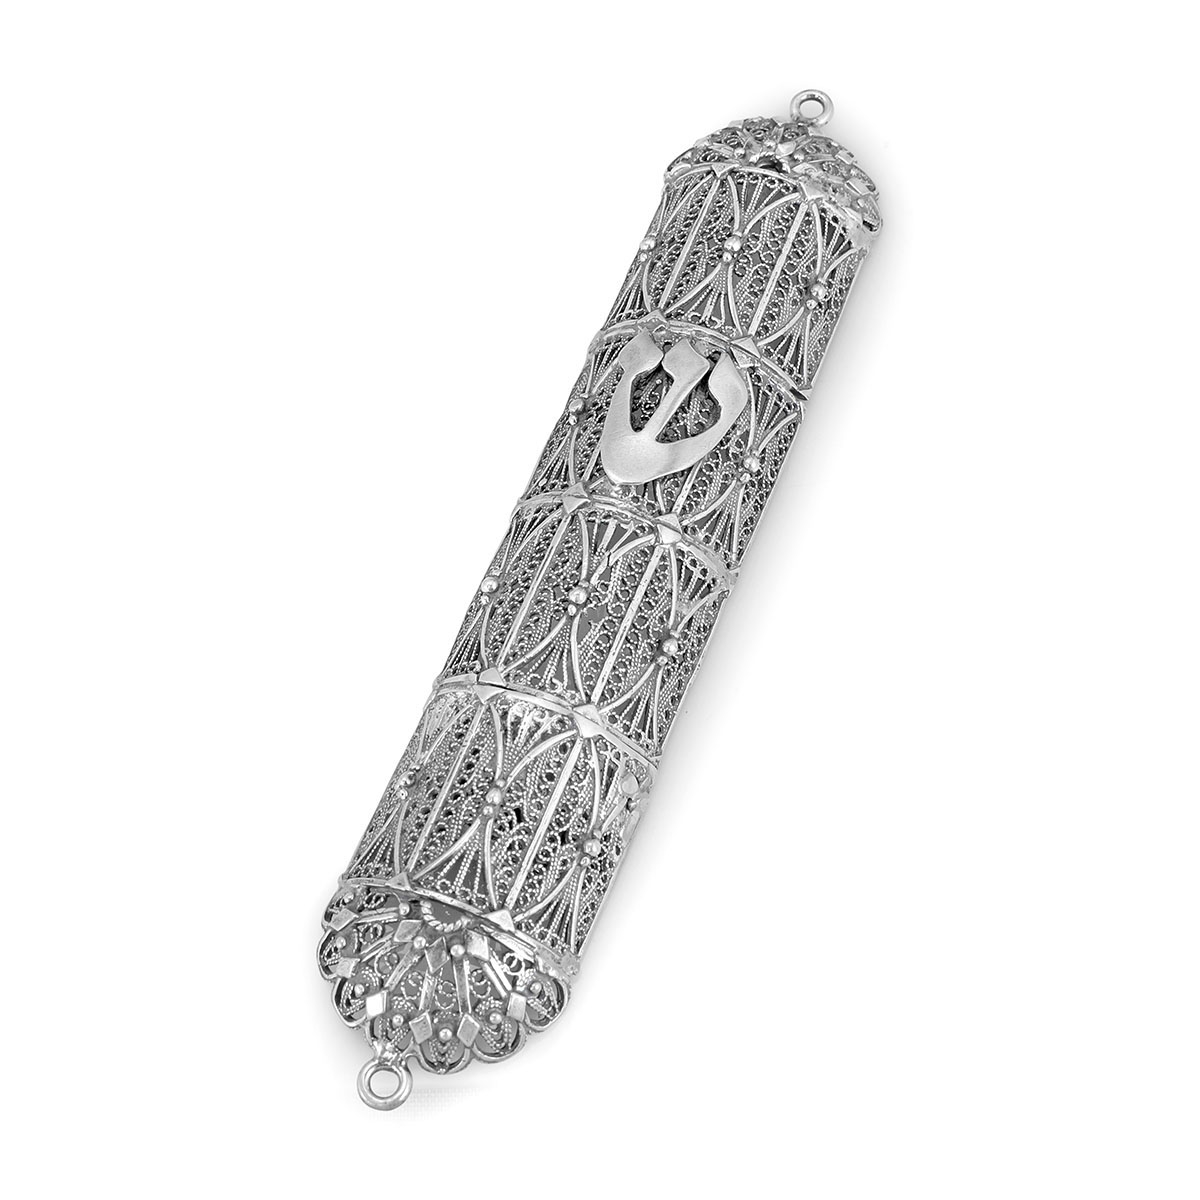 Traditional Yemenite Art Handcrafted Sterling Silver Mezuzah Case With Sectional Filigree Design - 1